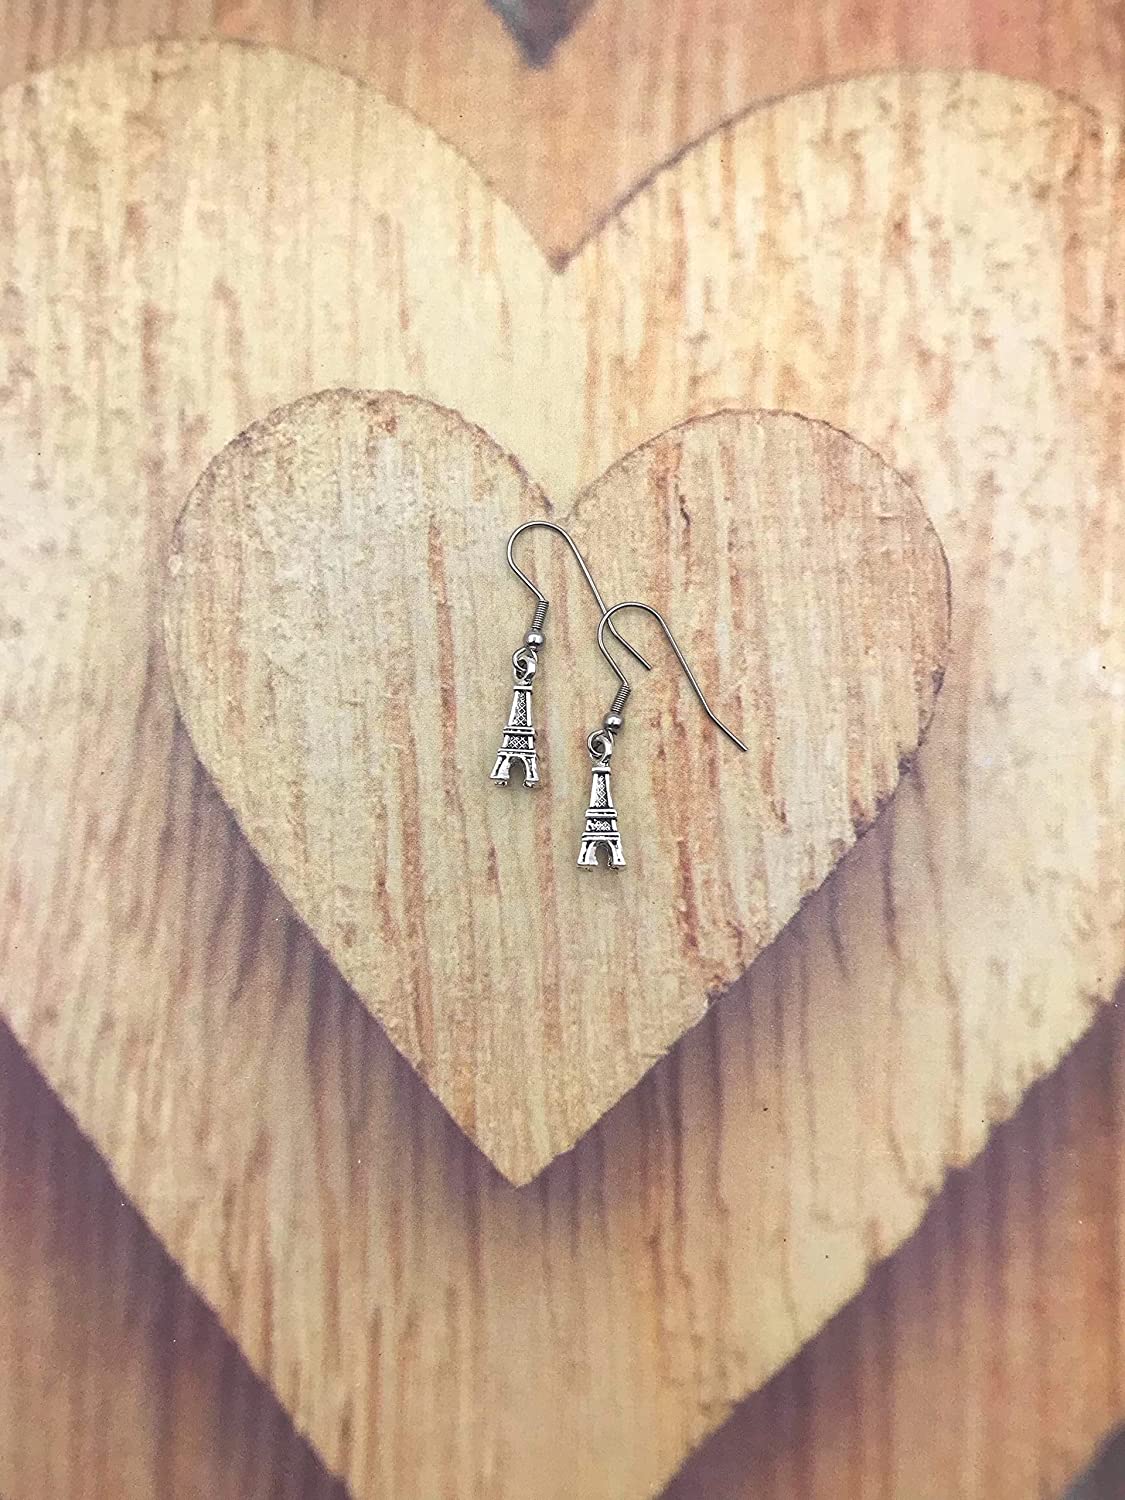 Small Antique Silver Eiffel Tower Earrings on Heart Shaped Wooden Display from Scott D Jewelry Designs